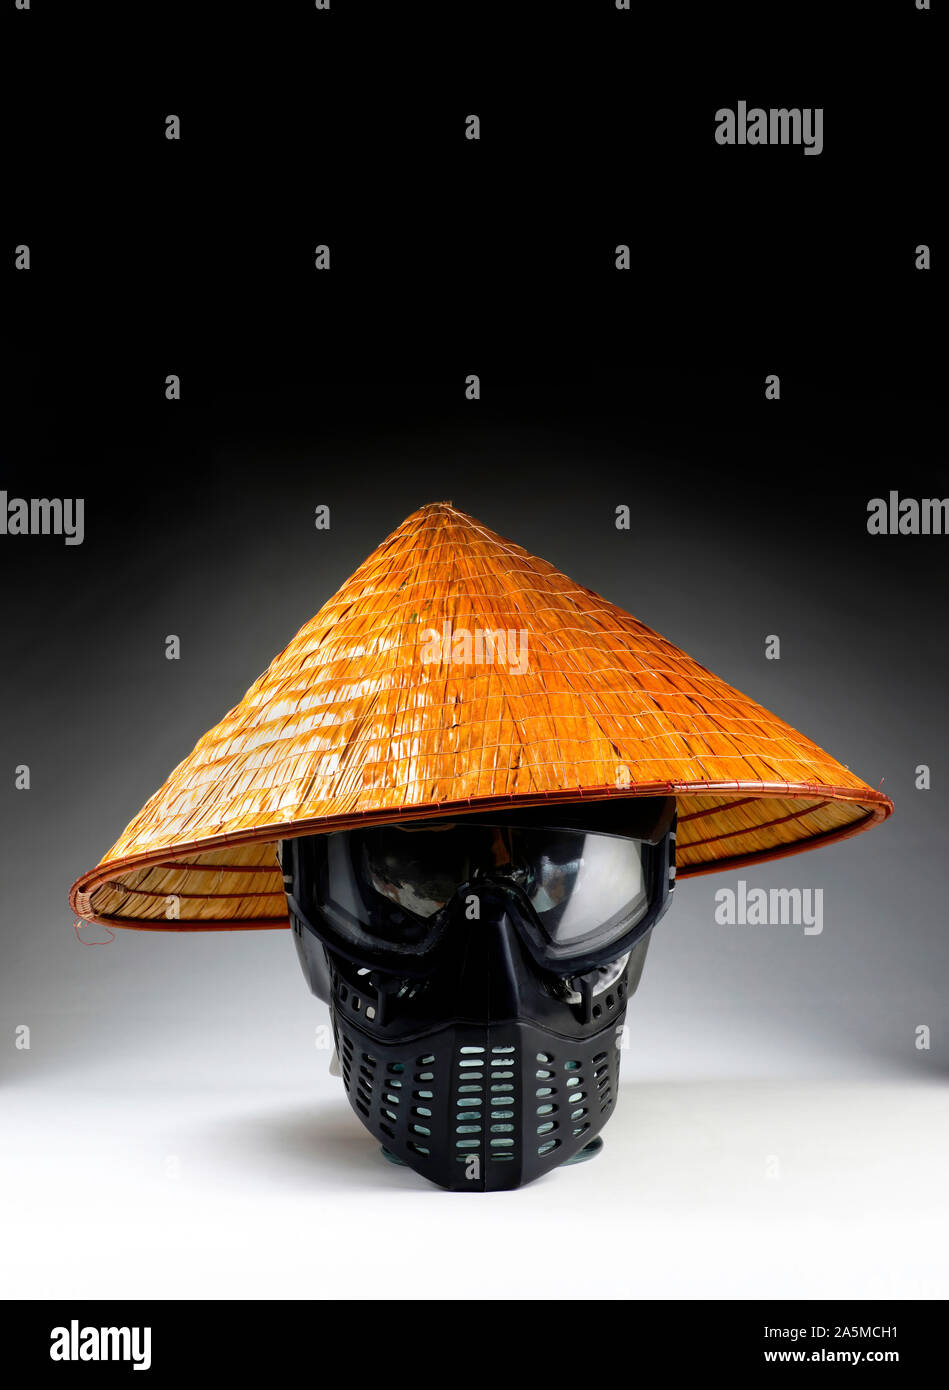 Asian bamboo hat with room for your type or text. Stock Photo